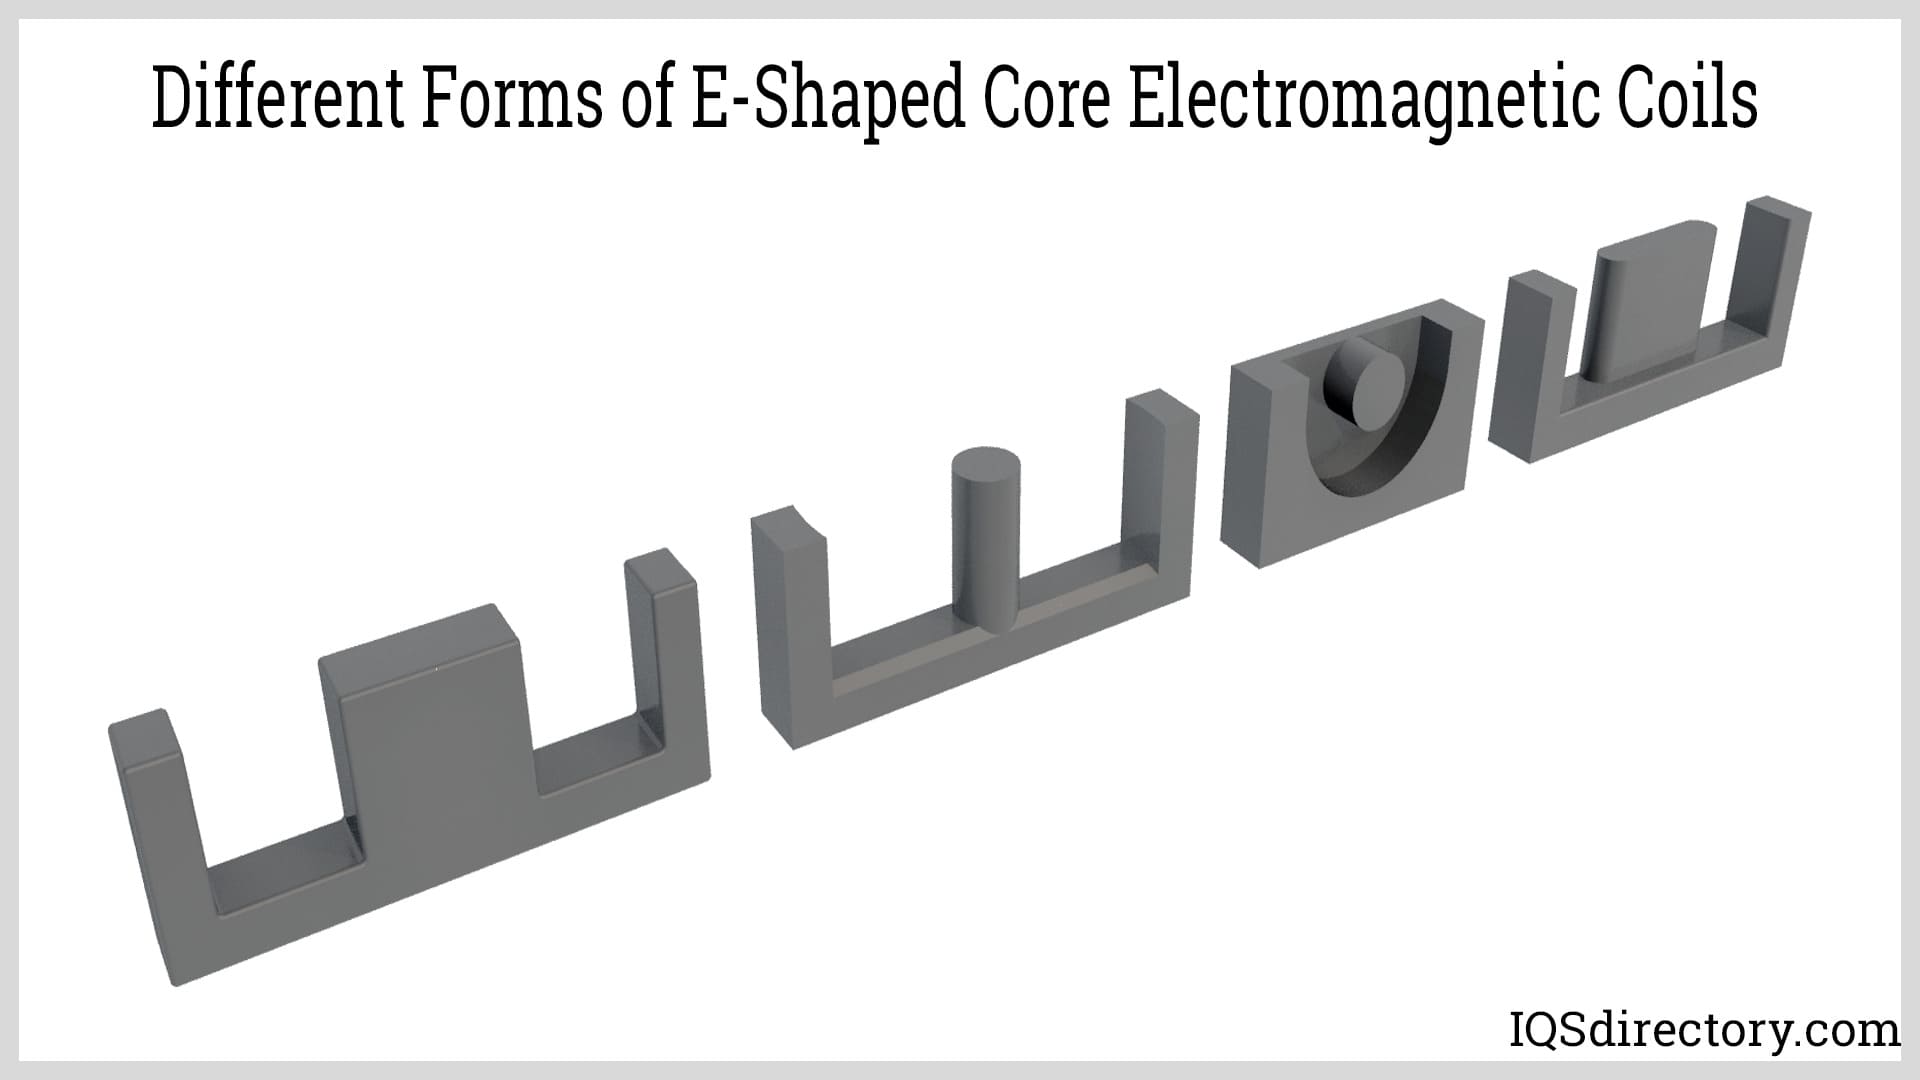 Different Forms of E-Shaped Core Electromagnetic Coils